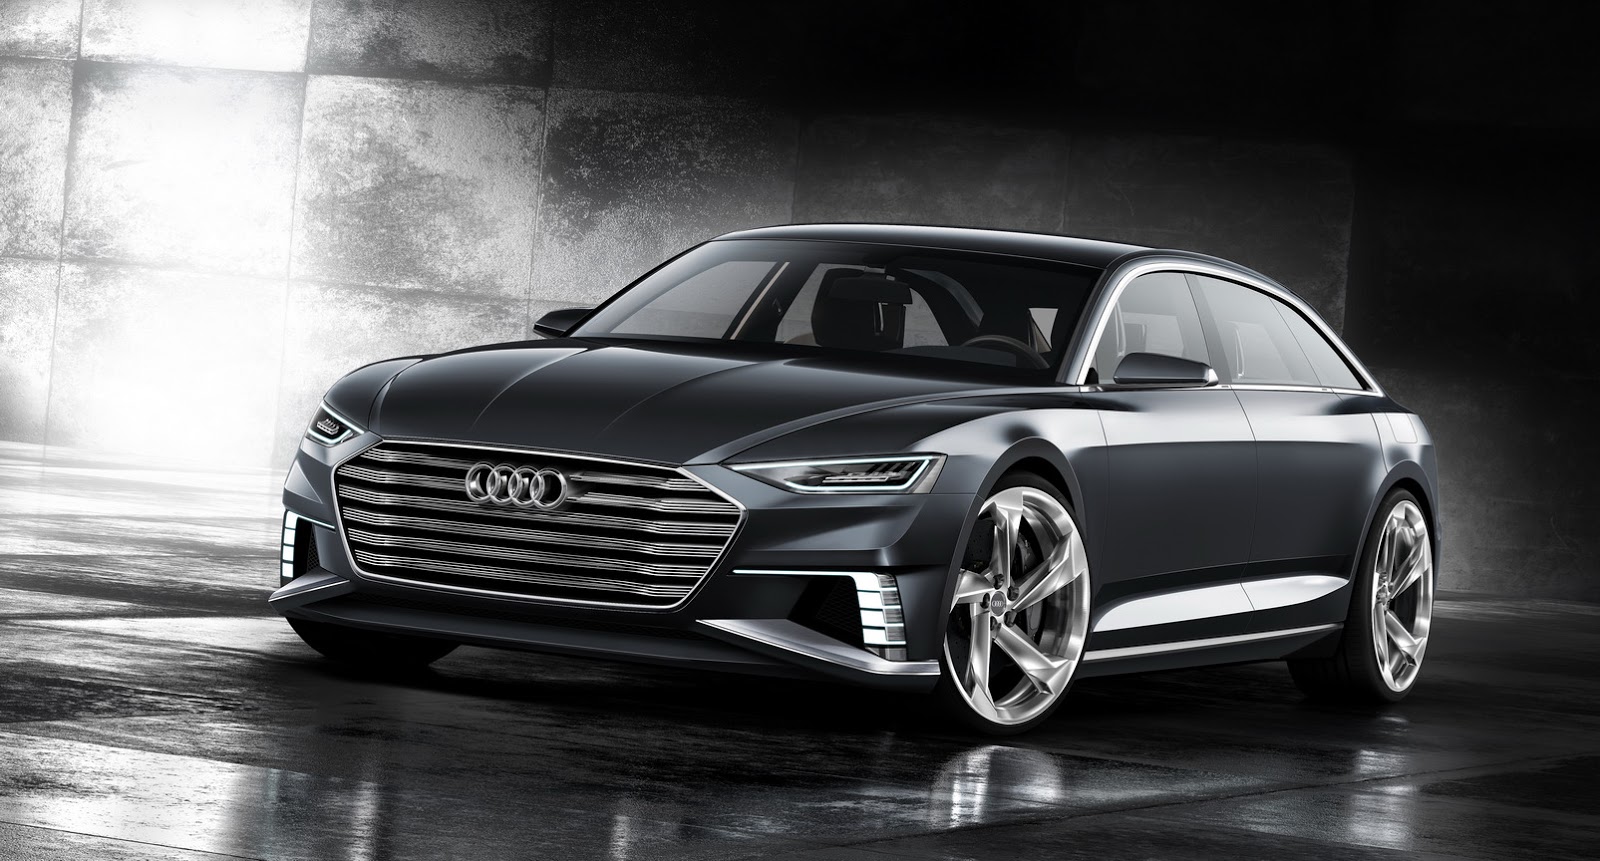 New Audi A8 Coming In 2017, Will Get Autonomous Driving ...